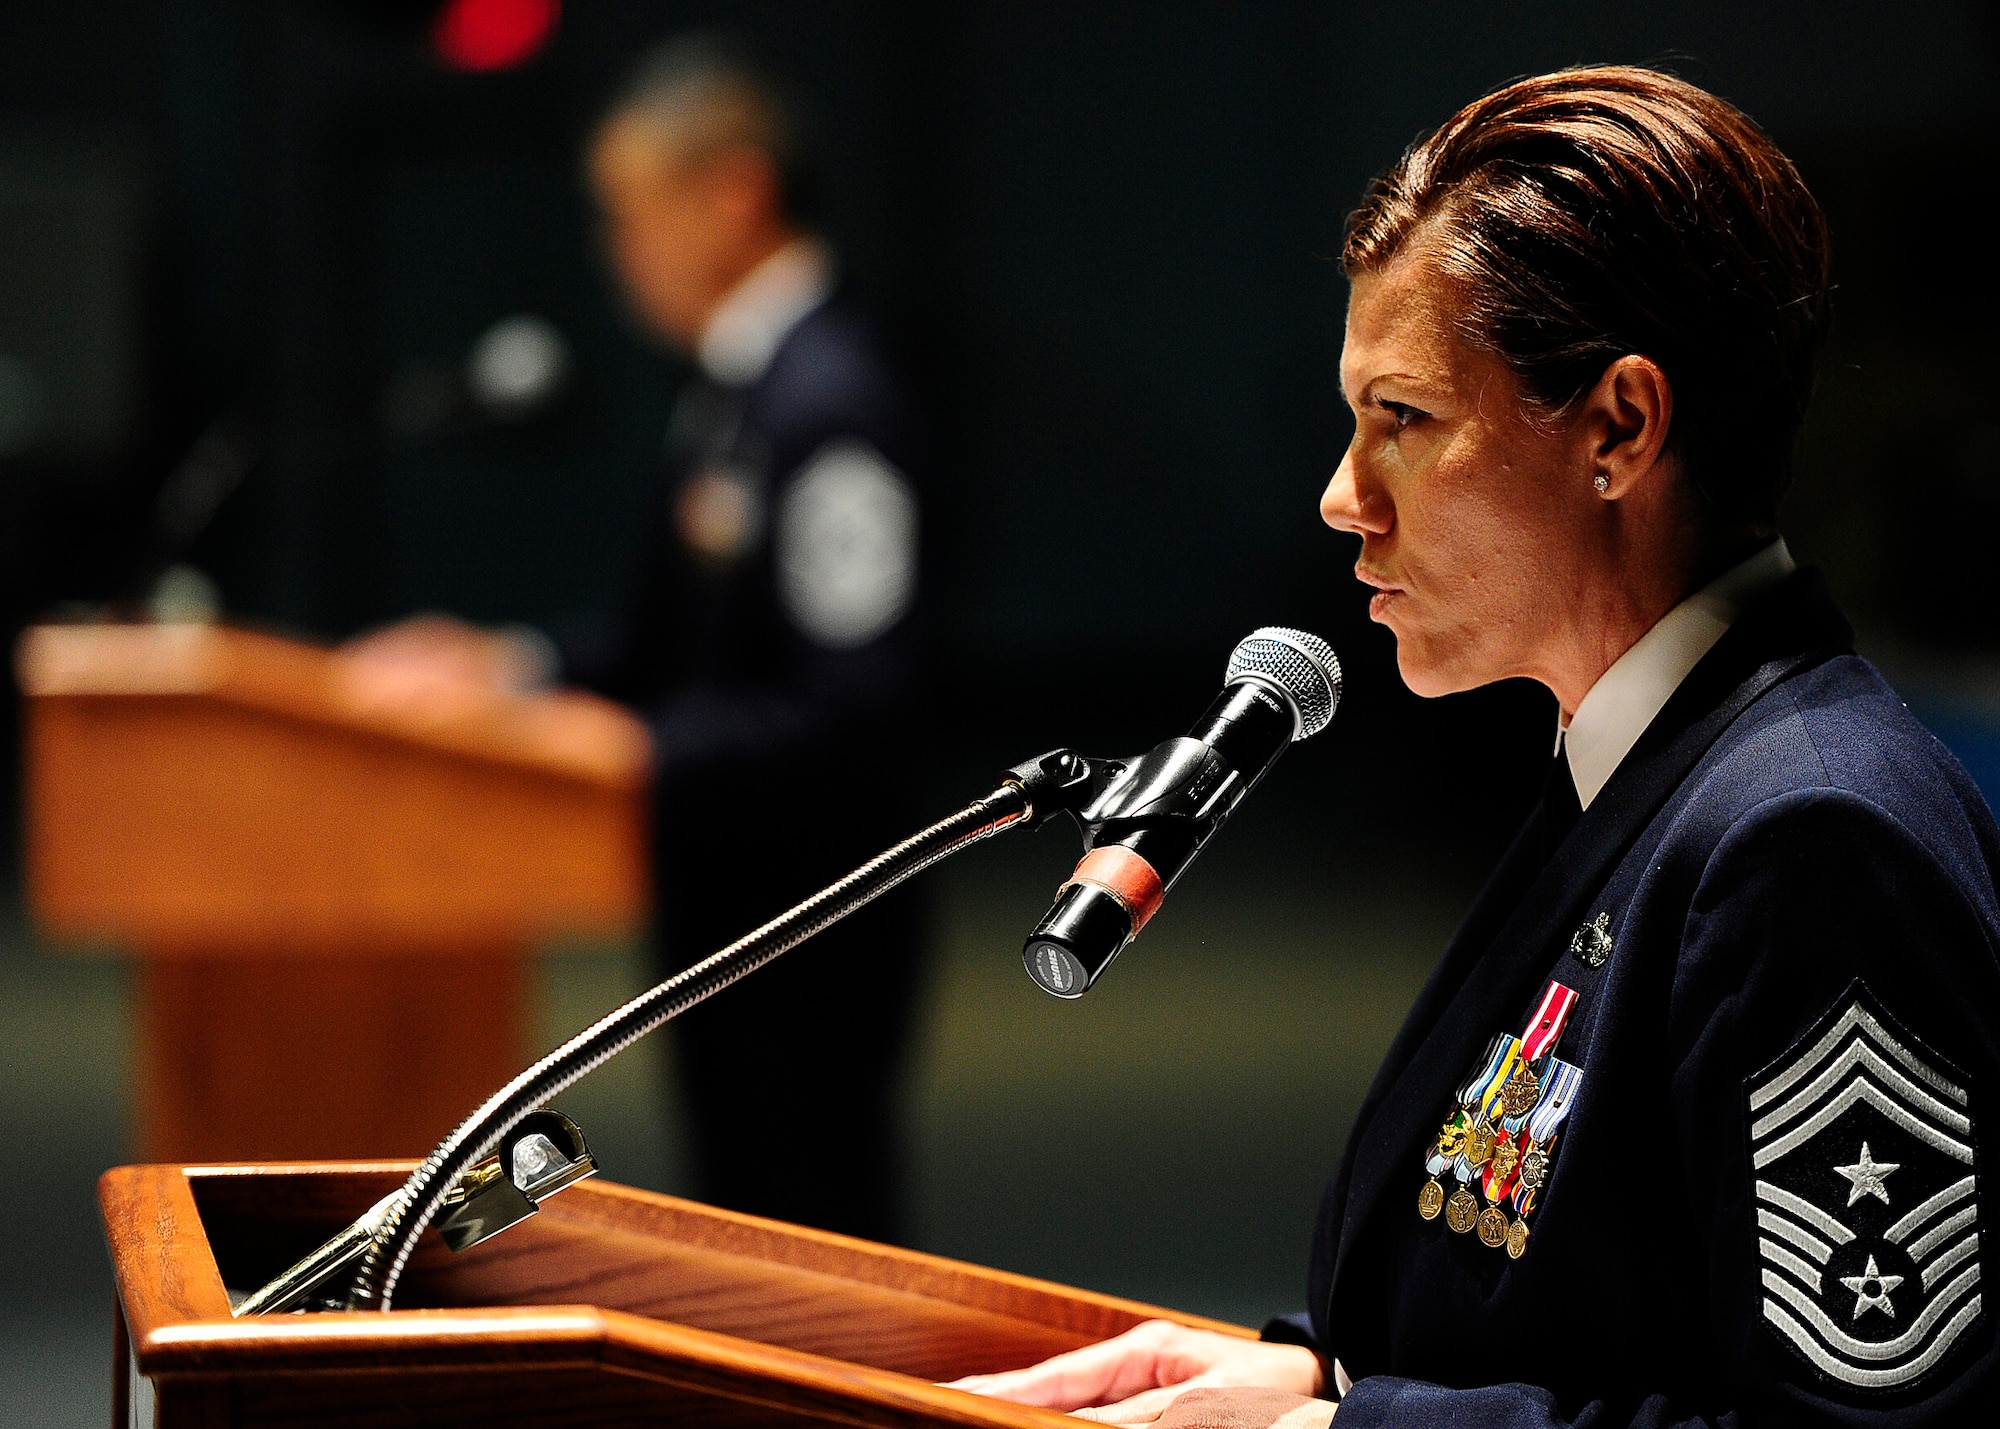 U.S. Air Force Chief Master Sgt. Ruthe Flores performs her duties as Duty Sergeant for the Order of the Sword ceremony at the Museum of Aviation in Warner Robins, Ga., July 13, 2016. The Order of the Sword is an honor awarded by the NCOs of a command to recognize individuals they hold in high esteem and for their contributions to the enlisted corps. (U.S. Air Force photo by Tech. Sgt. Stephen D. Schester)